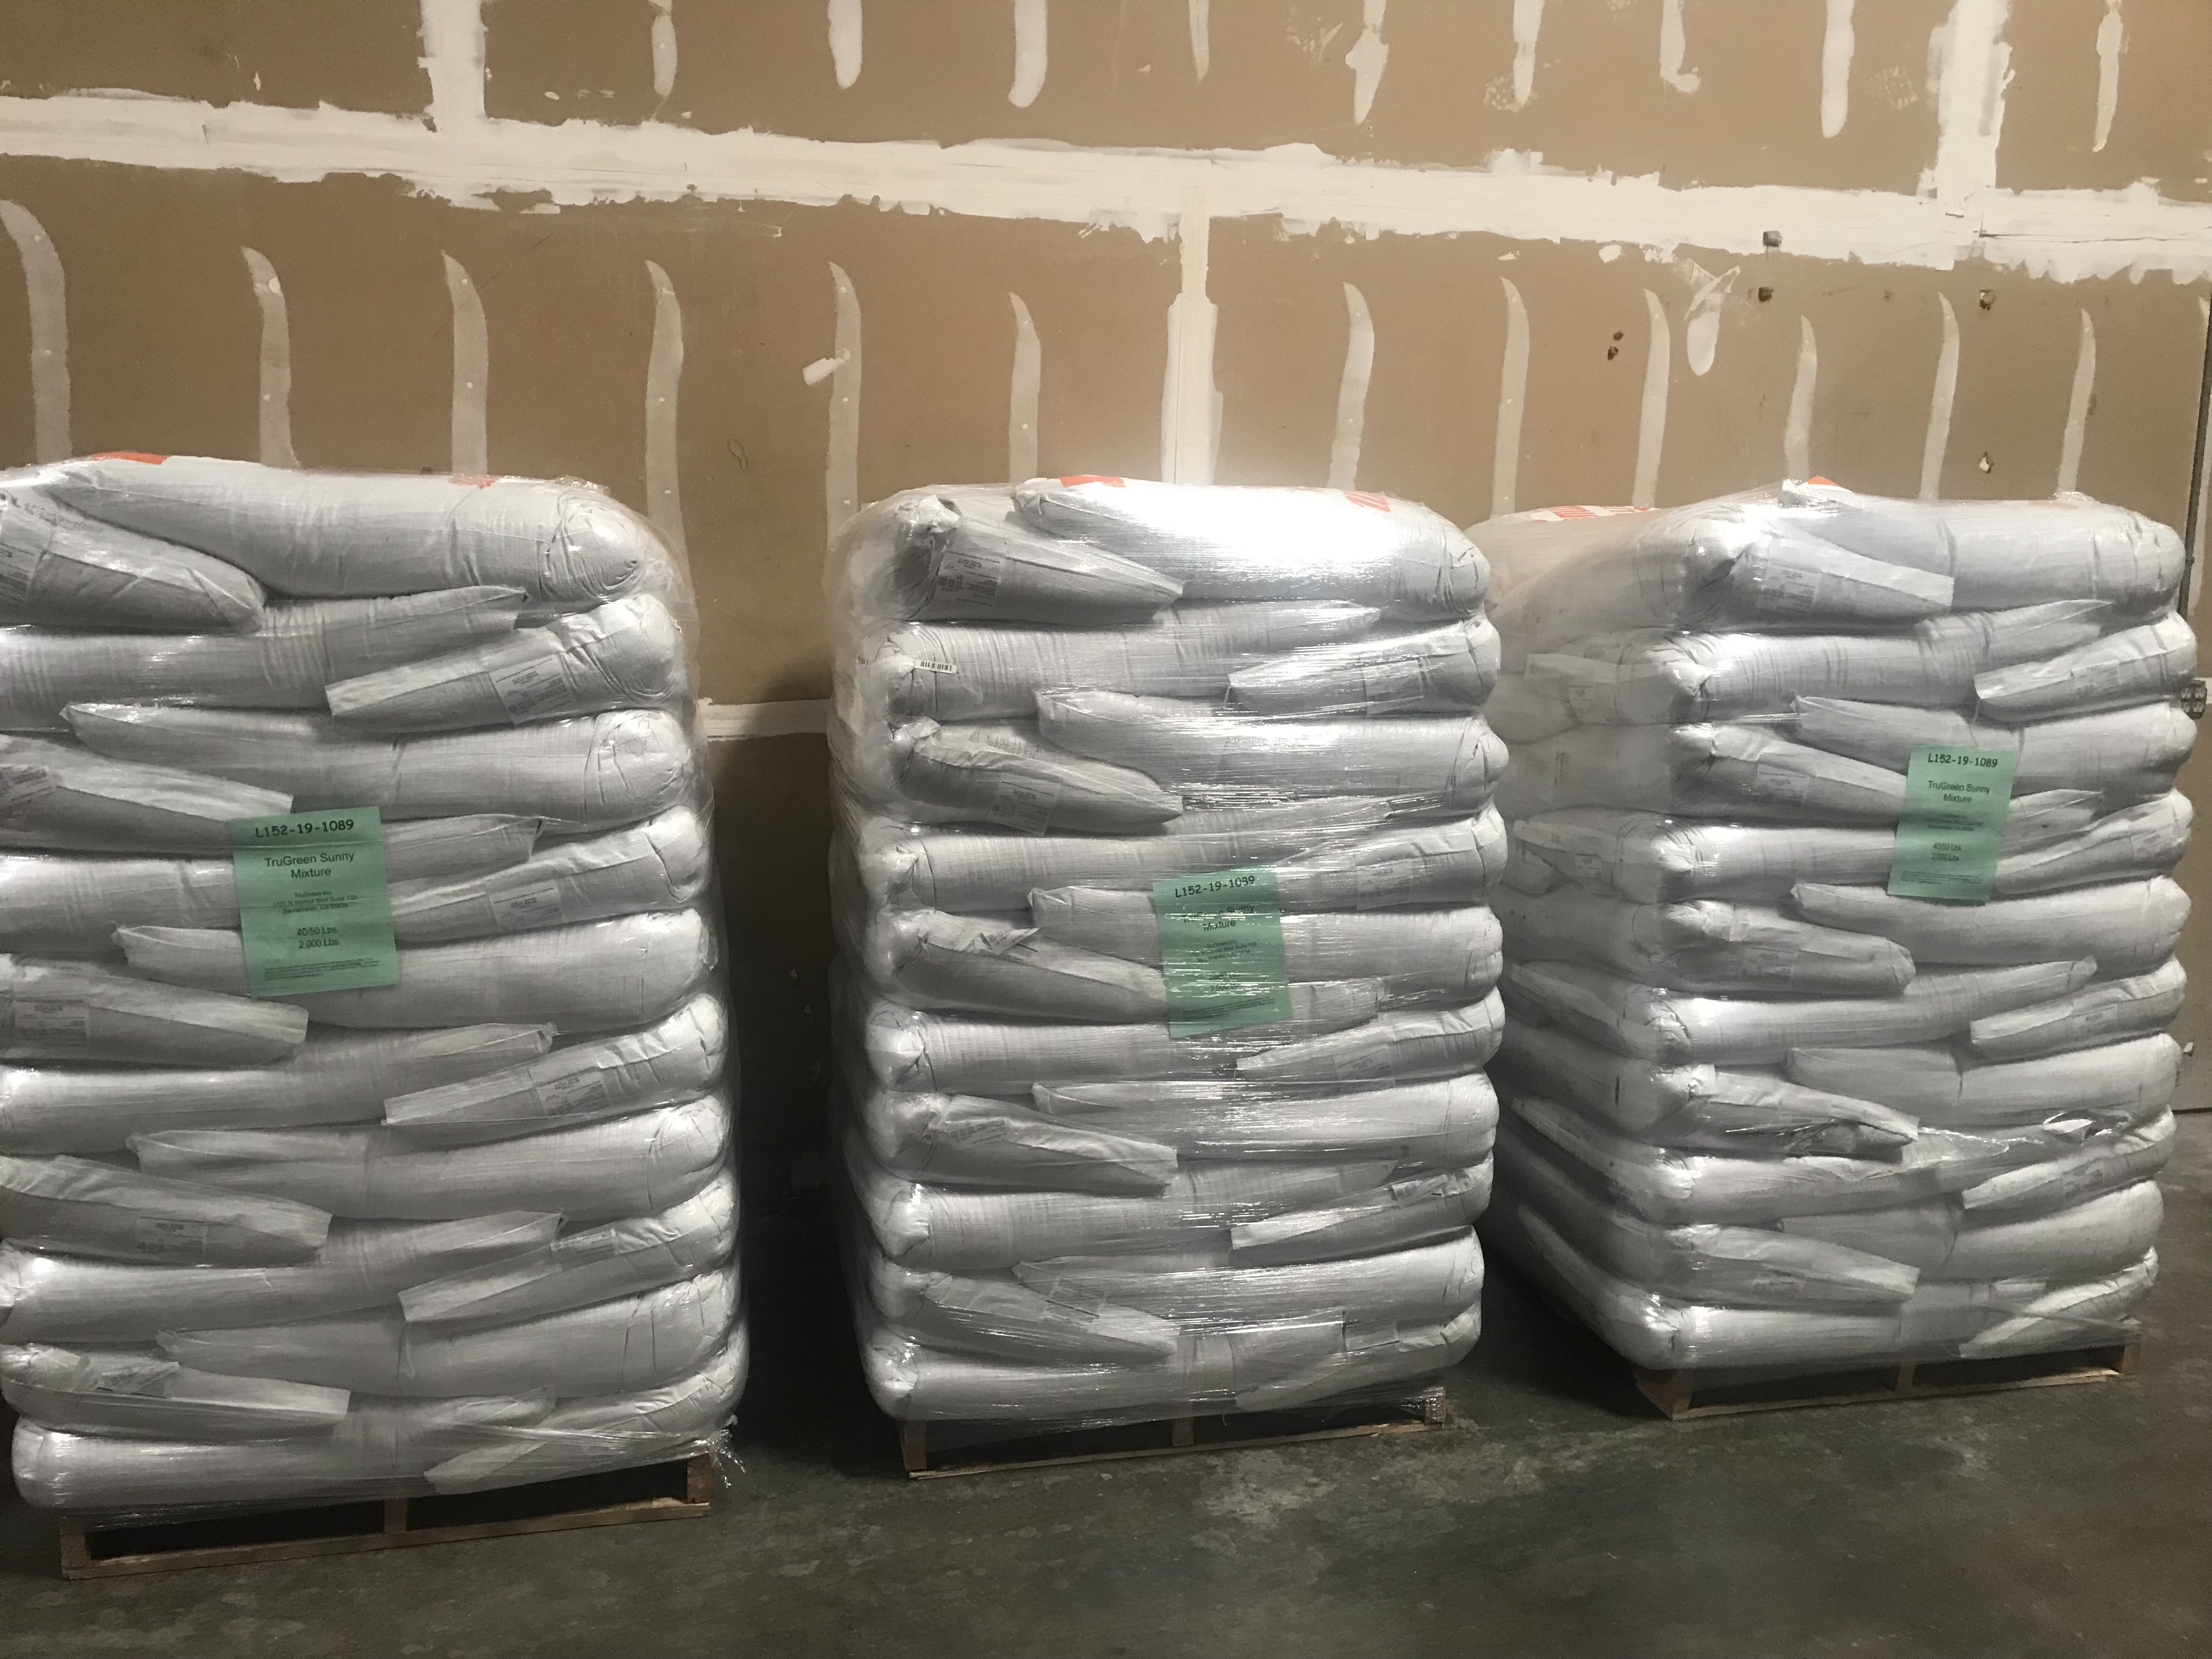 Bags of seed stacked on pallets